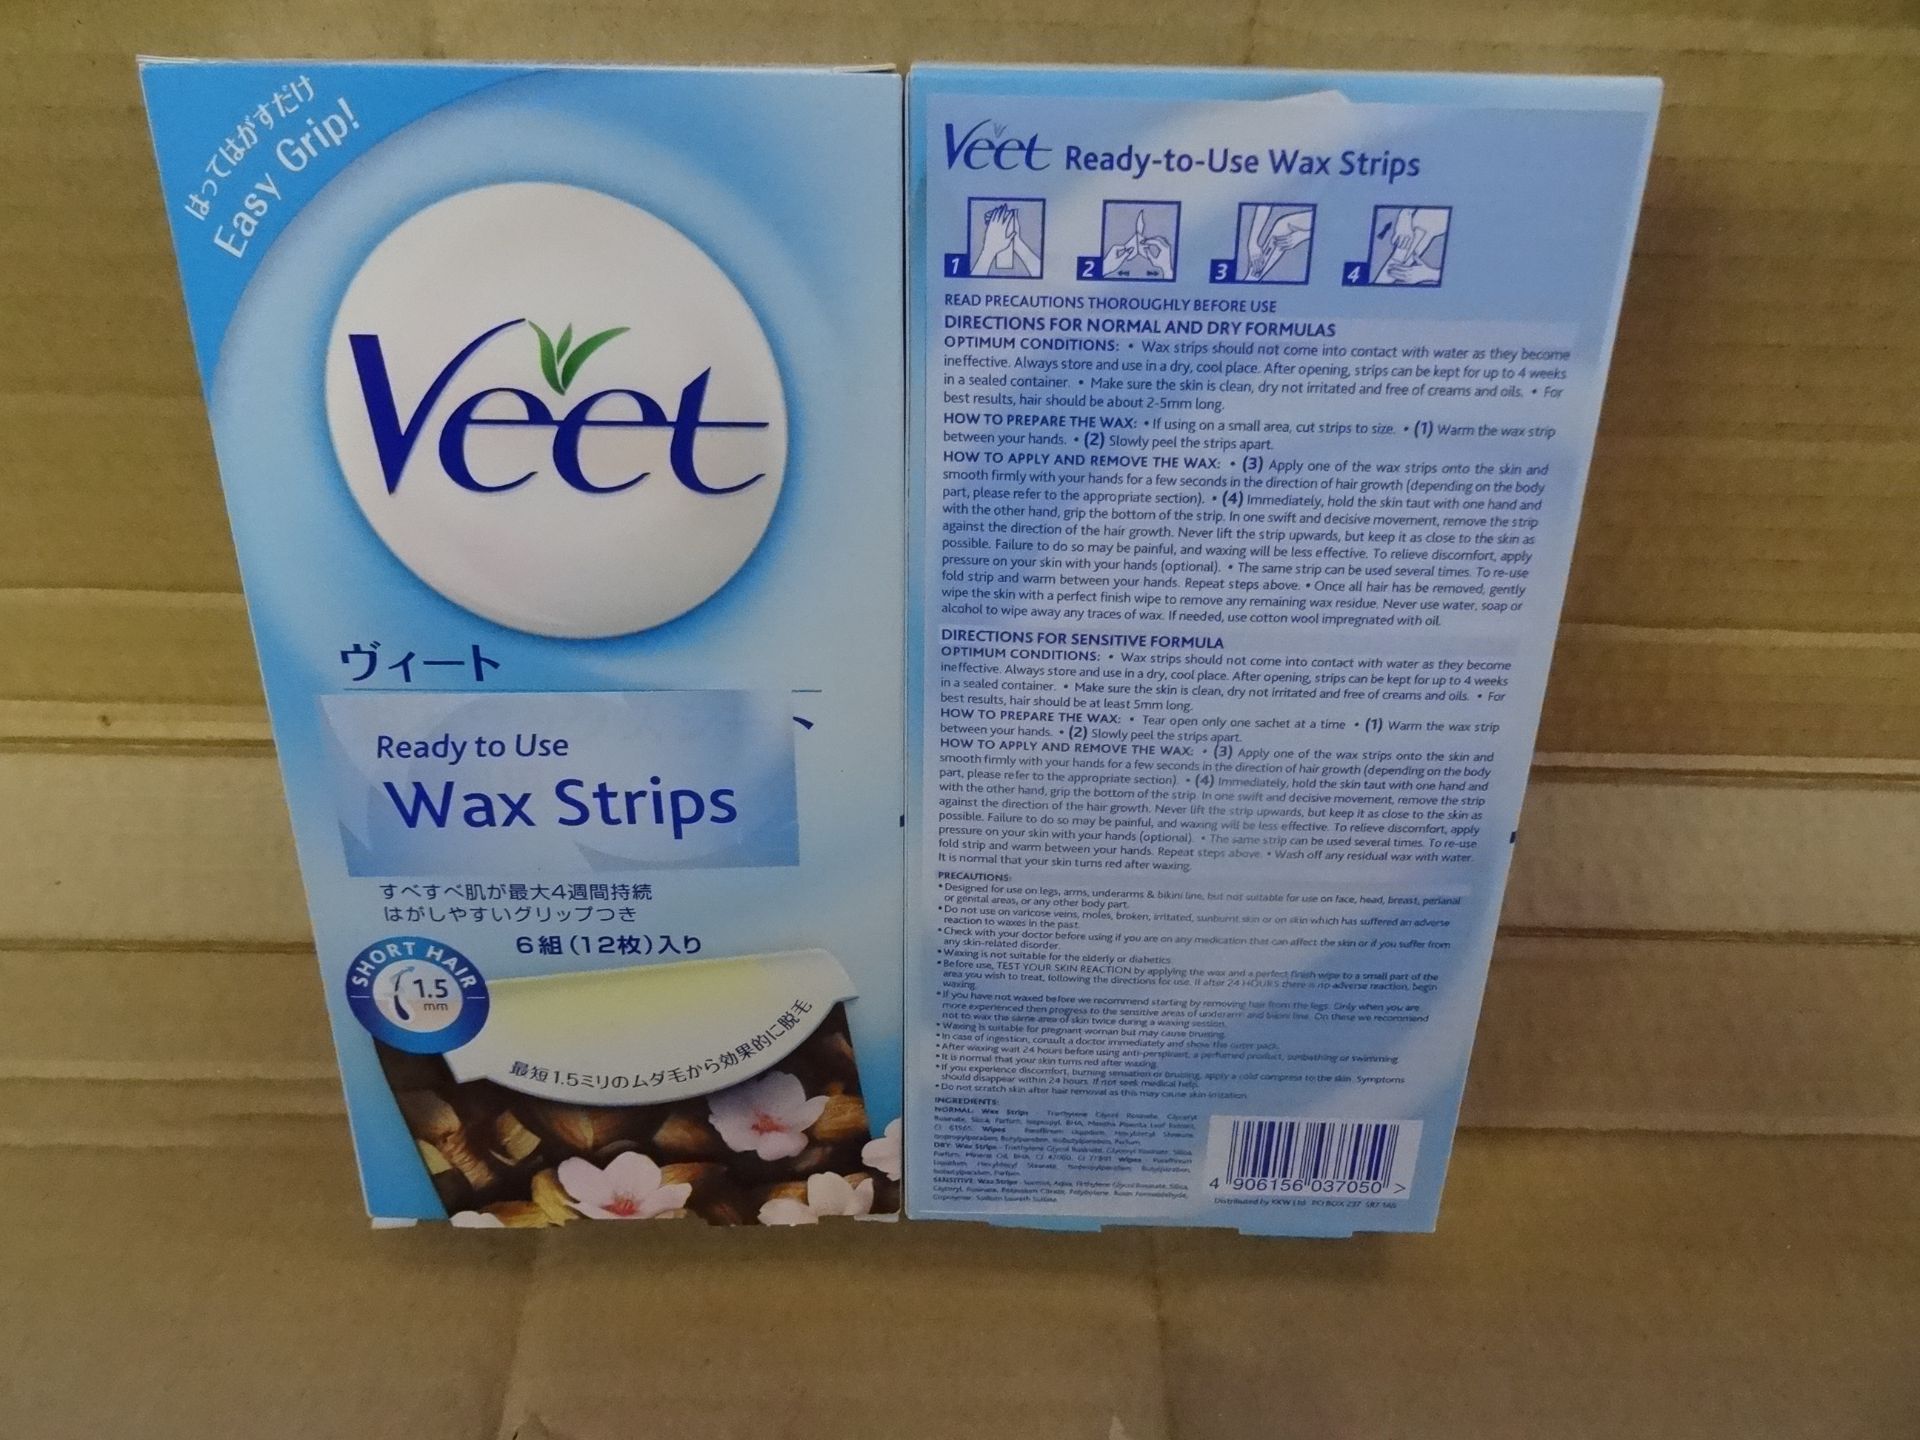 1 x Pallet to contain 720 x Packs of 6 Veet Ready To Use Wax Strips. For Short Hair upto 1.5mm.